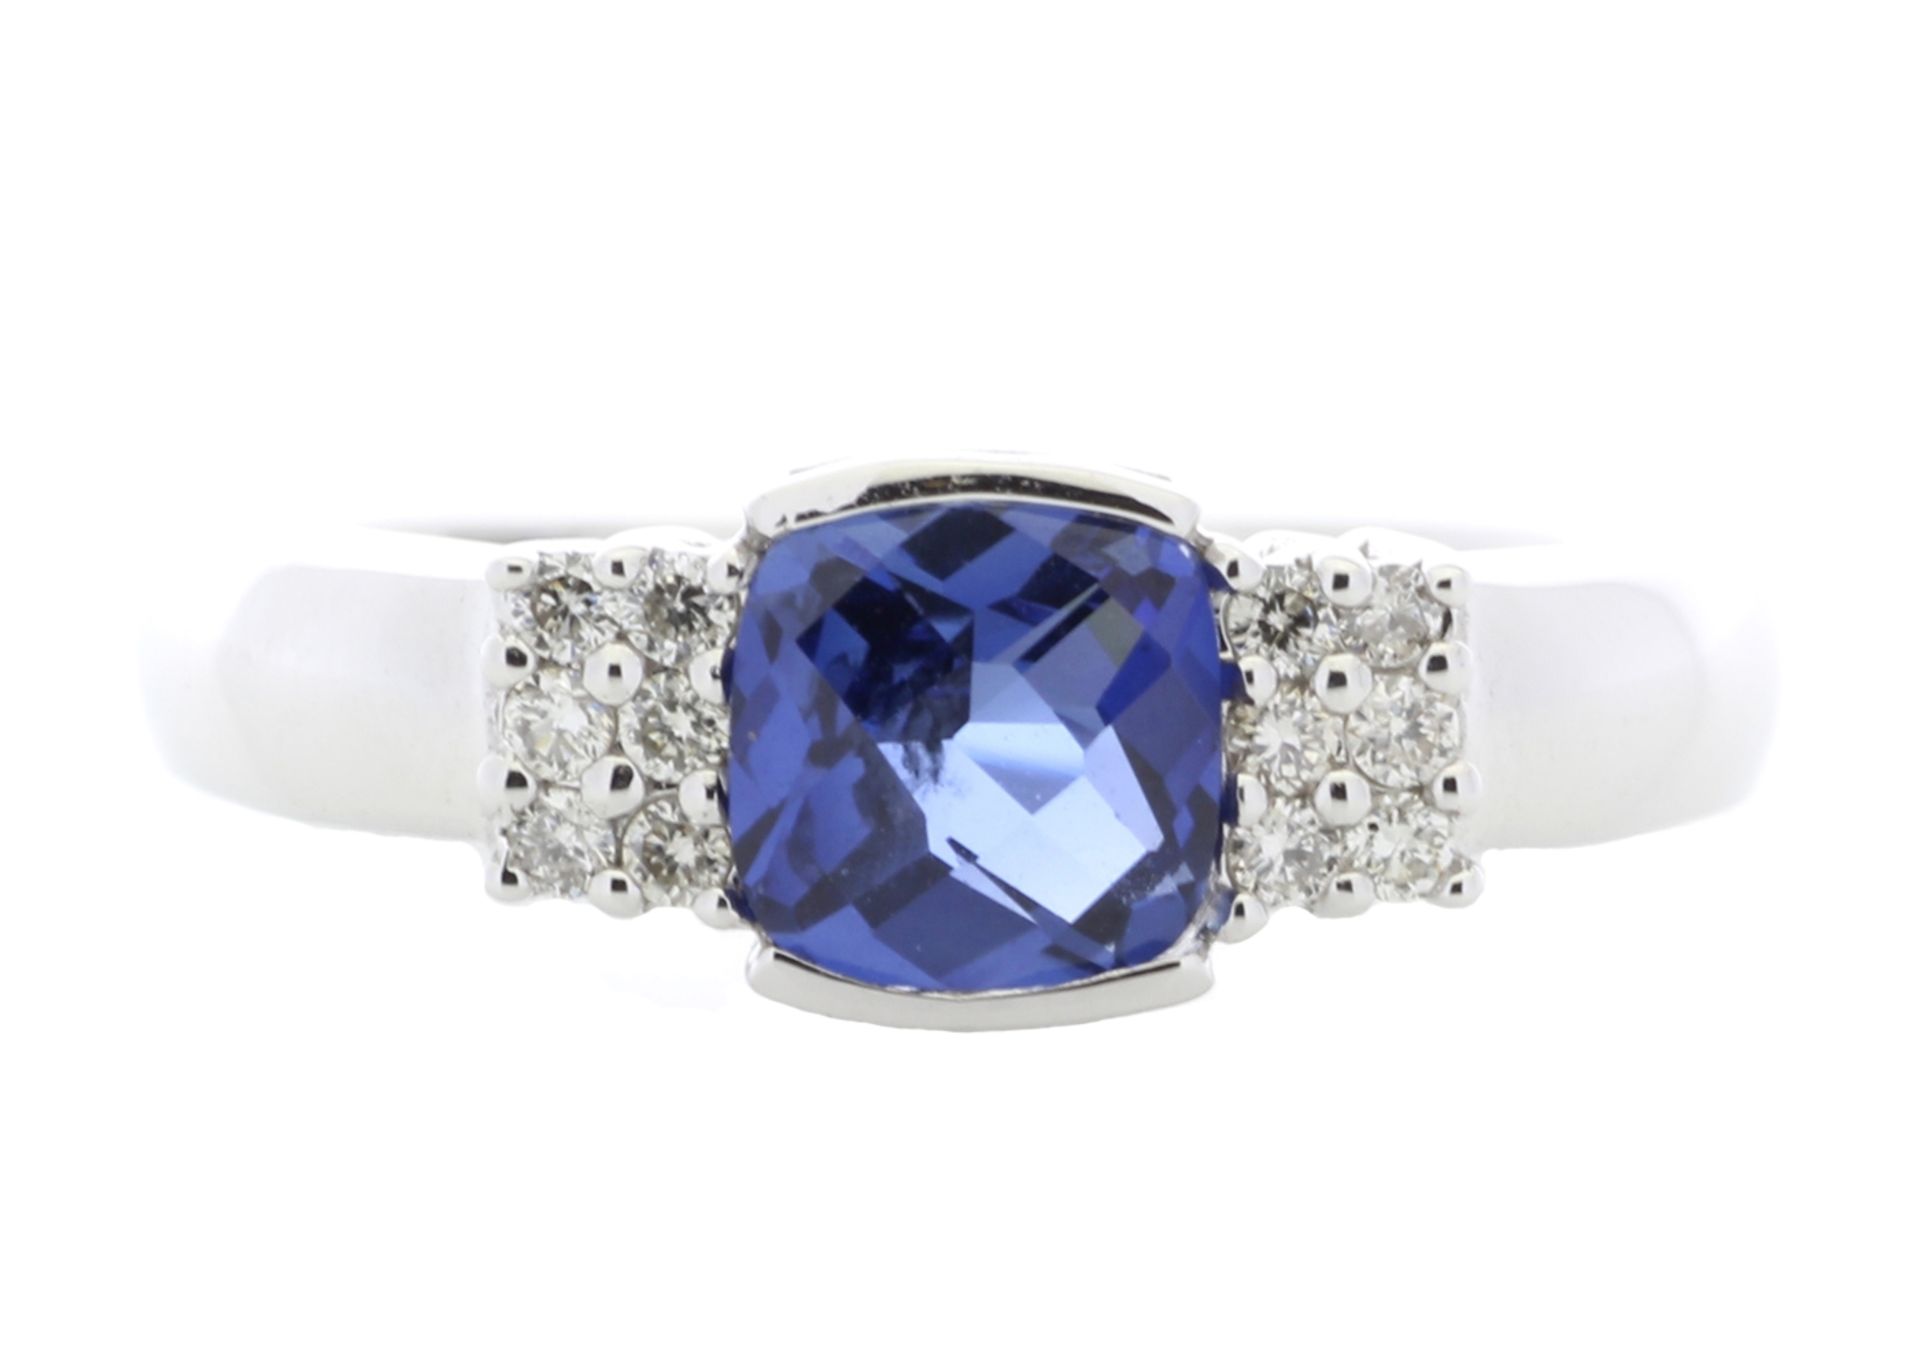 9ct White Gold Created Ceylon Sapphire Diamond Ring 0.08 Carats - Valued by AGI £695.00 - 9ct